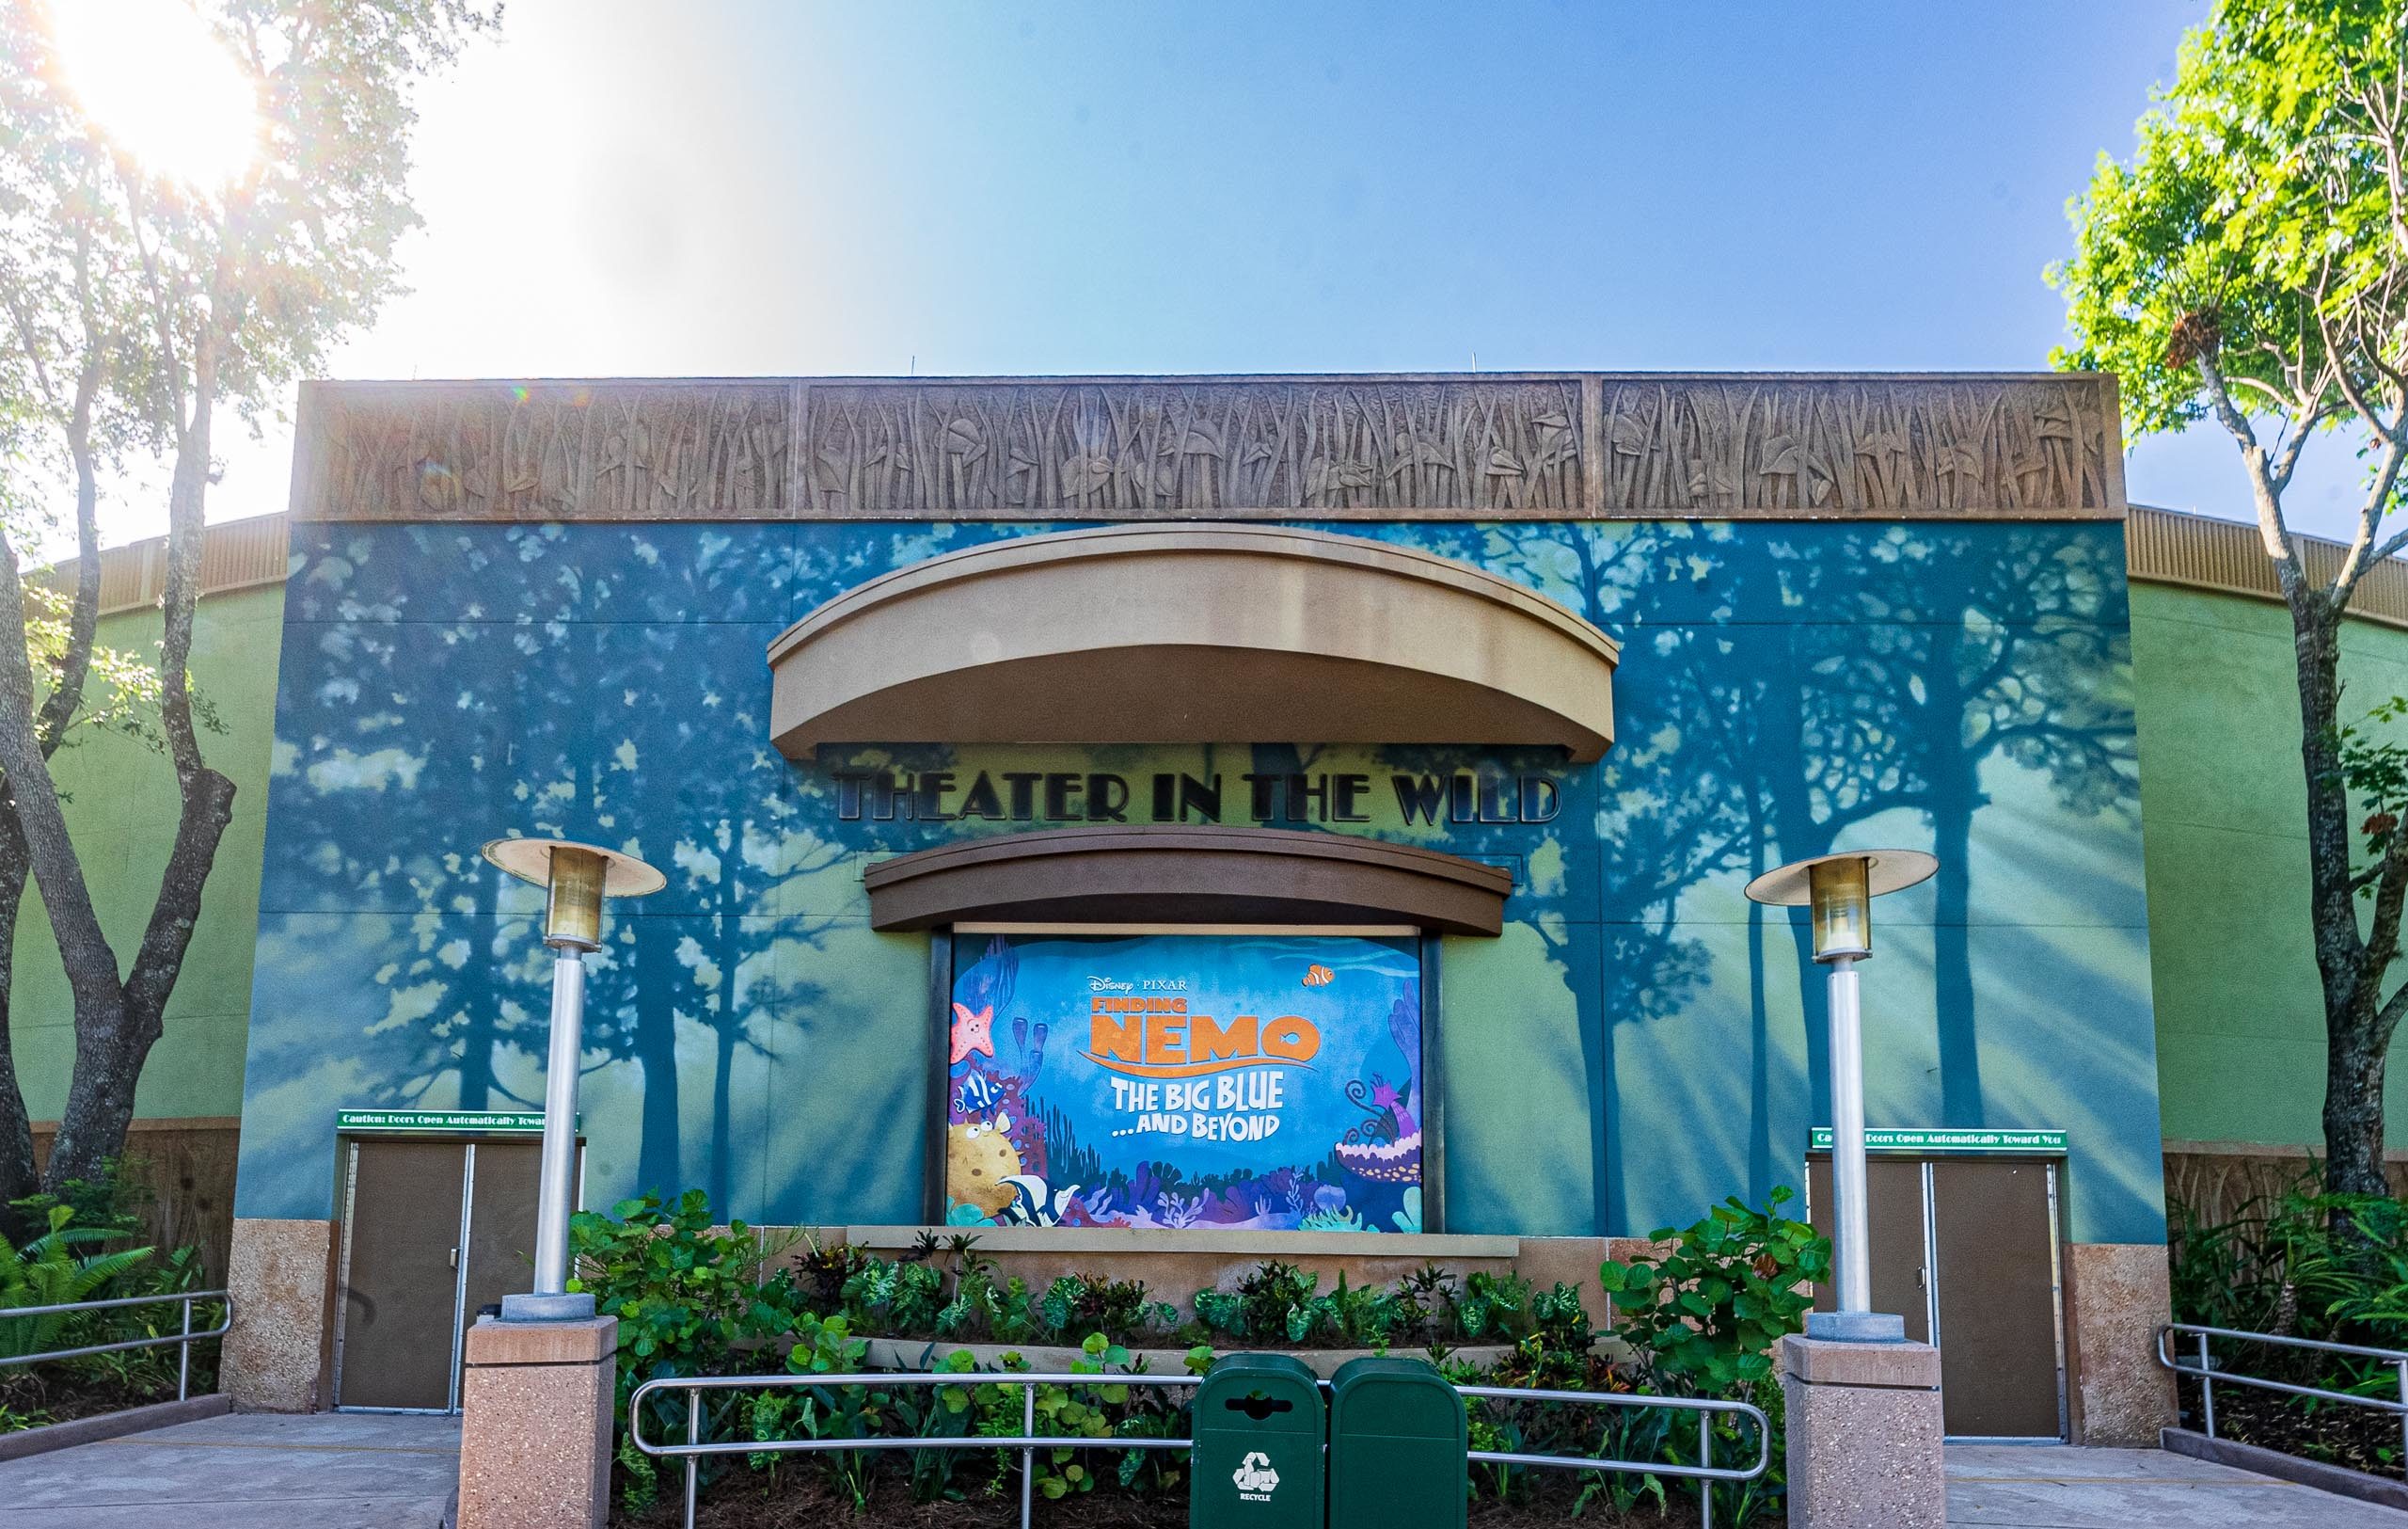 Theater entrance - Finding Nemo the Musical